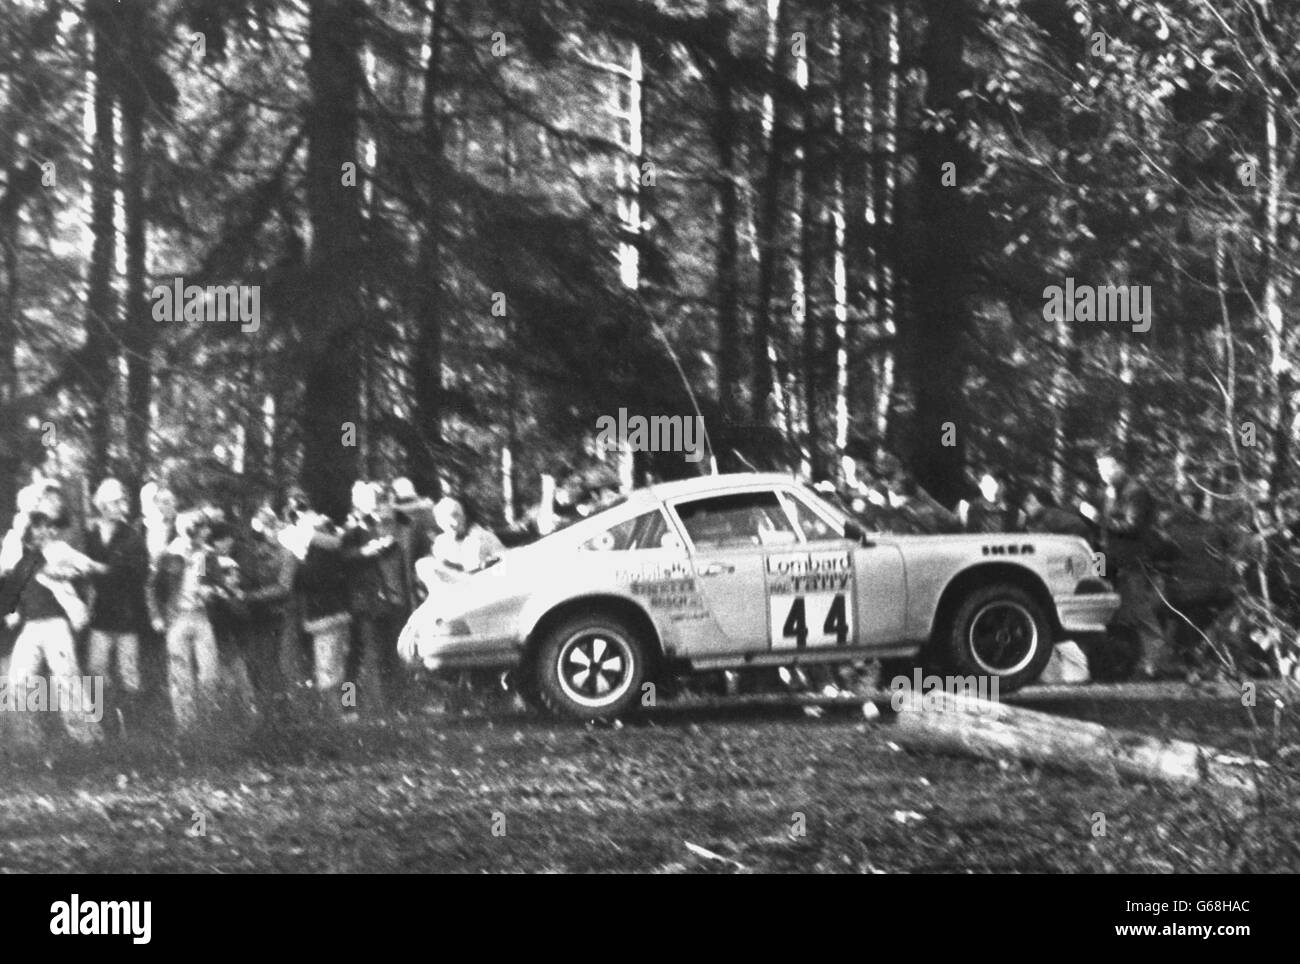 The RAC Round-Britain rally got underway from Bath yesterday and, during the Second stage, the West German champion Heinz-Walter Schewe and his co-driver Franz-Josef Moormann crashed their Porsche 911SC on a tight bend in the Forest of Dean into spectators. Two spectators were seriously injured and several others hurt, causing the stage to be abandoned and competitors moved on to Stage three. Stock Photo